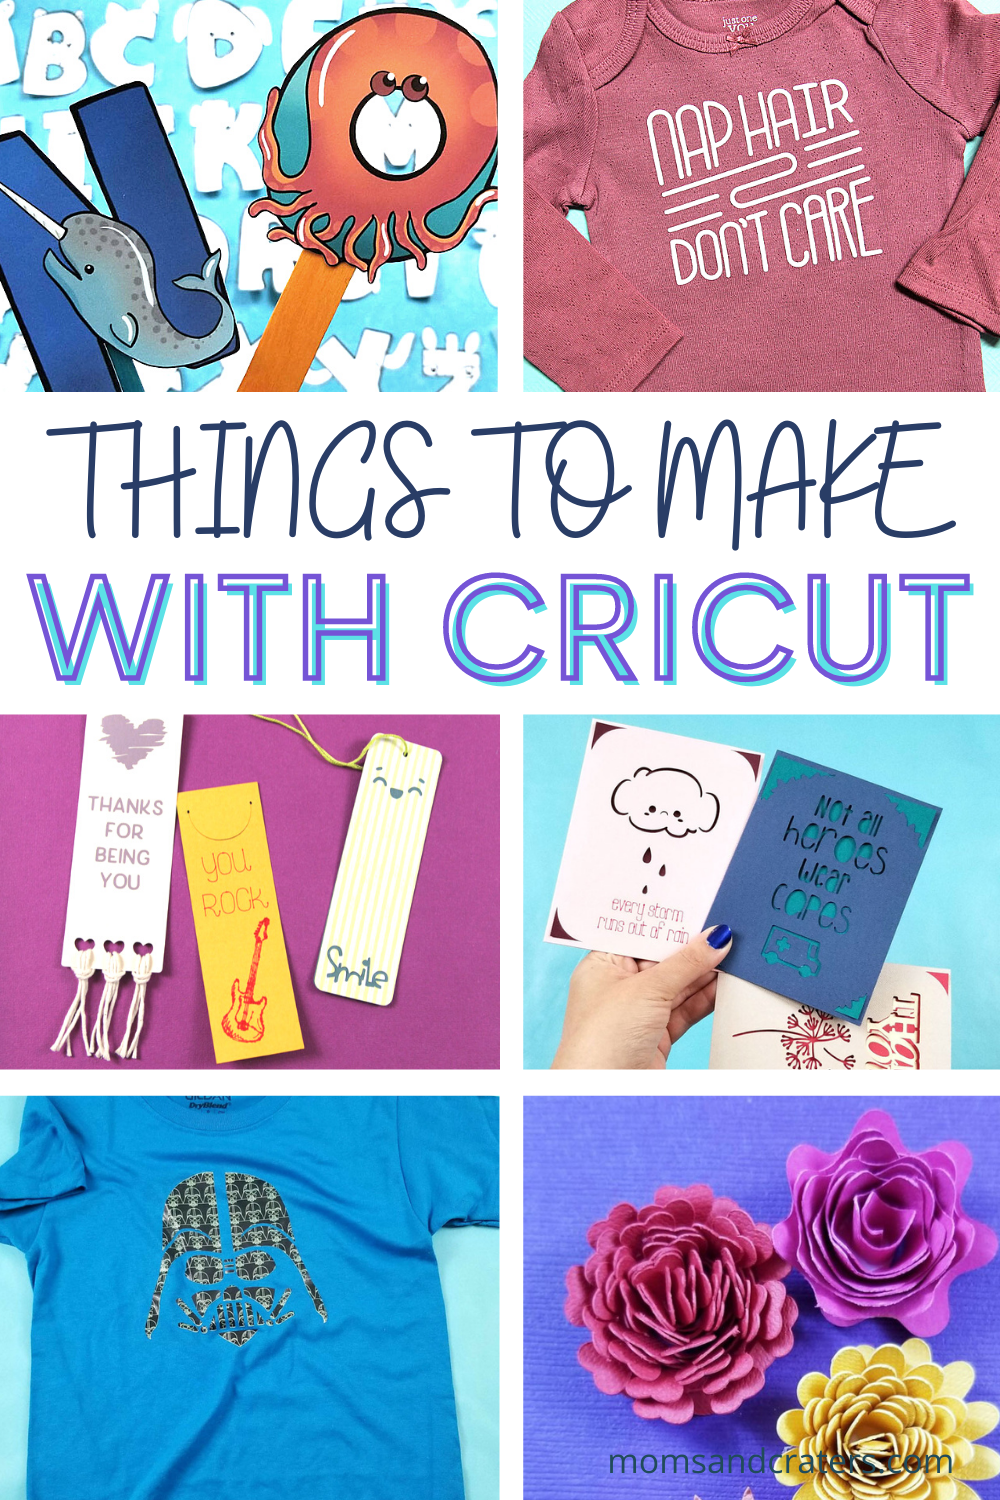 awesome and inspiring cricut scoring wheel projects  Scrapbooking cricut,  Cricut projects beginner, Cricut projects